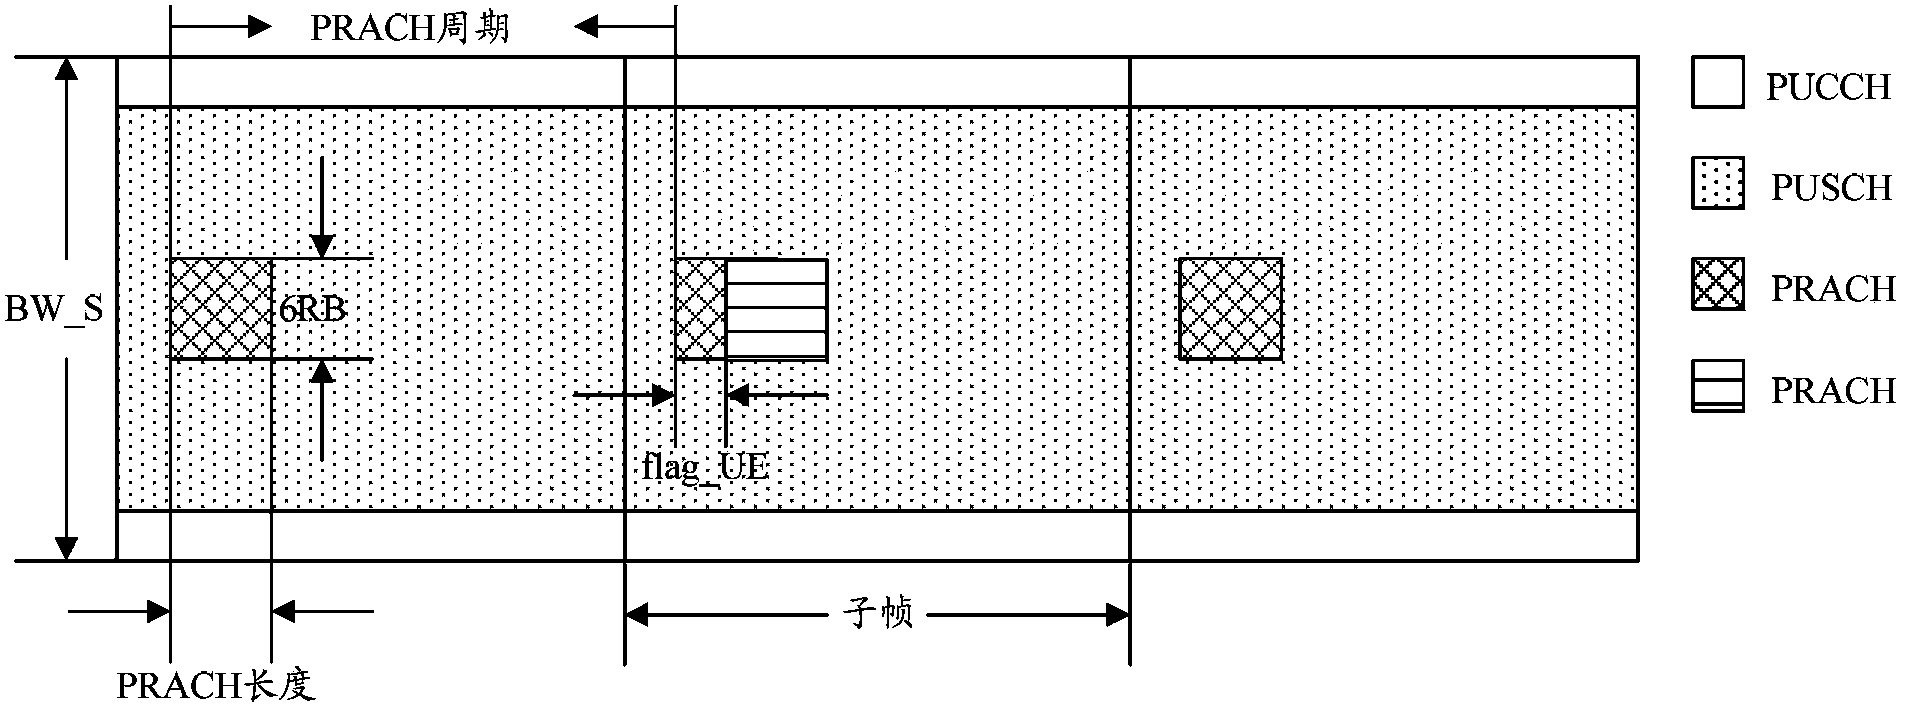 Method for MTC UE to have access to LTE system and evolution base station